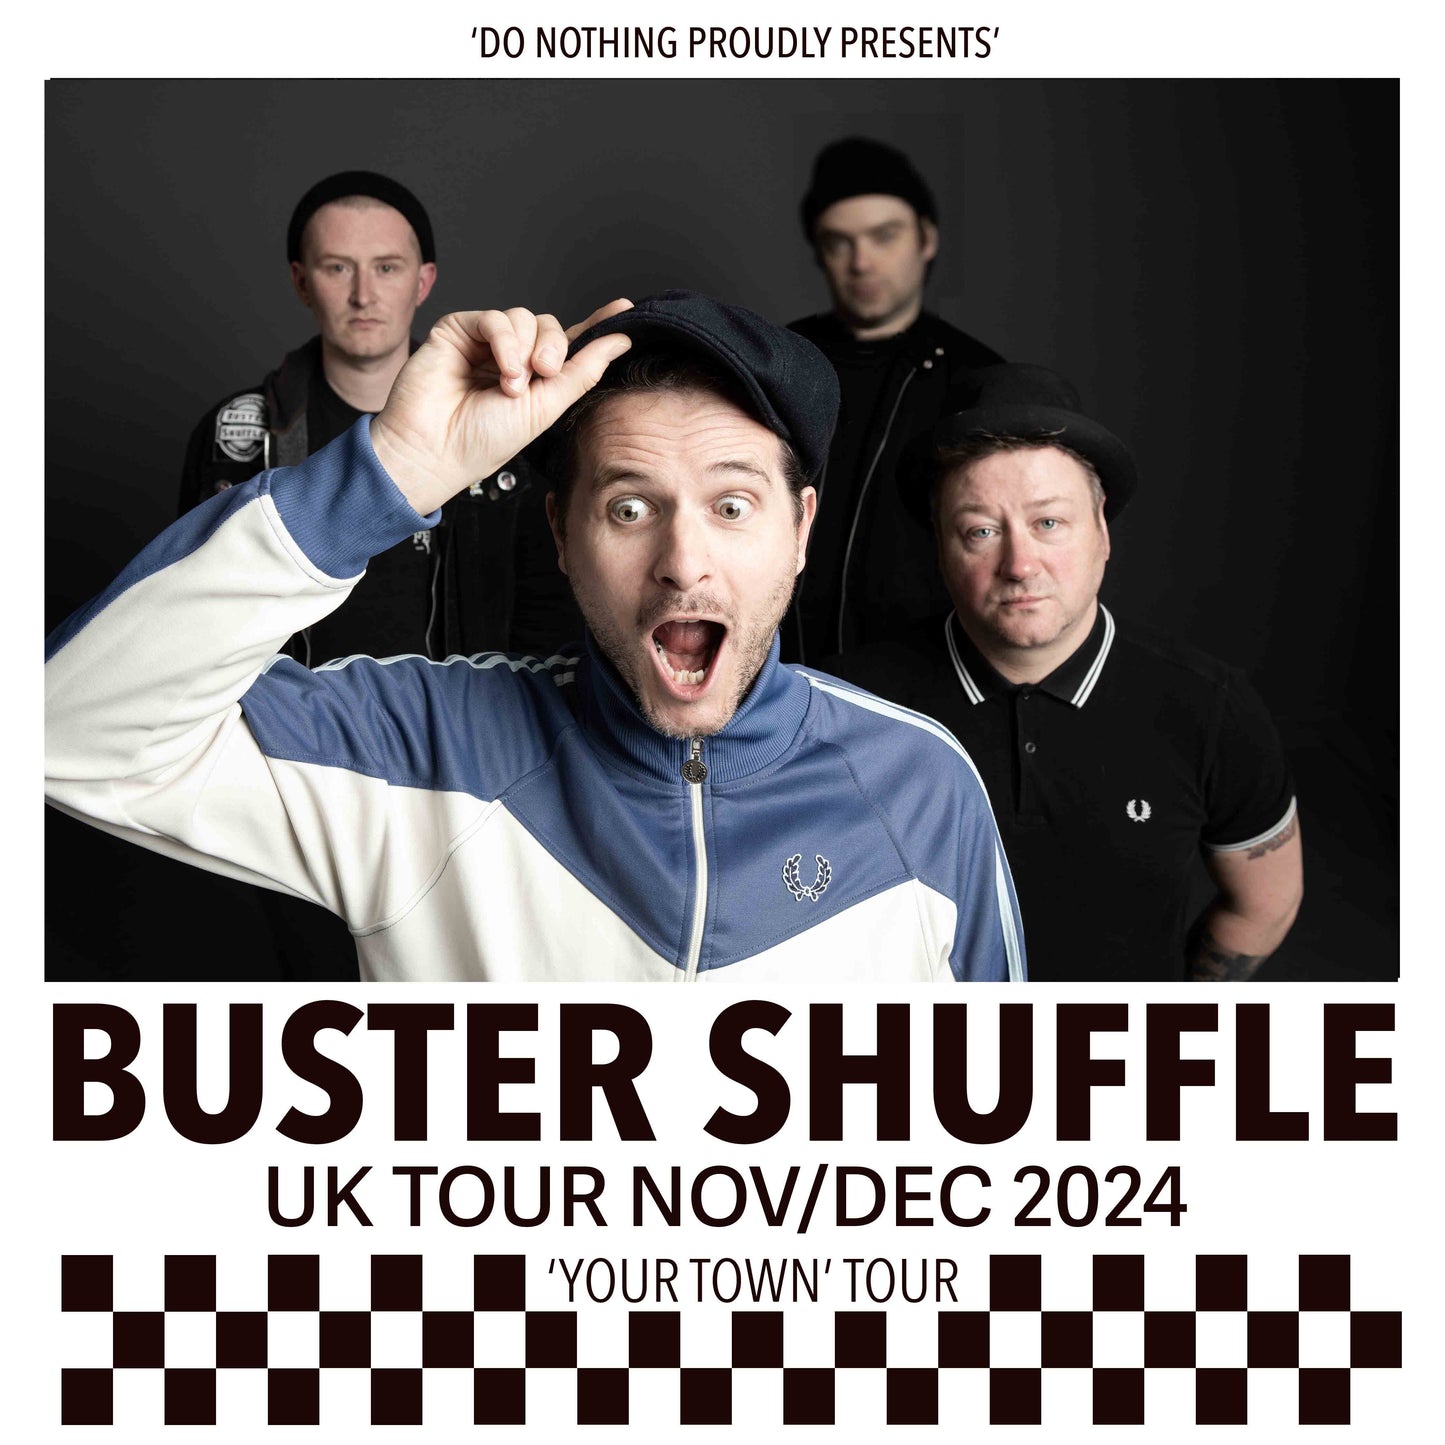 EXETER/ Buster Shuffle/ Live/ SAT 07/12/24 Cavern